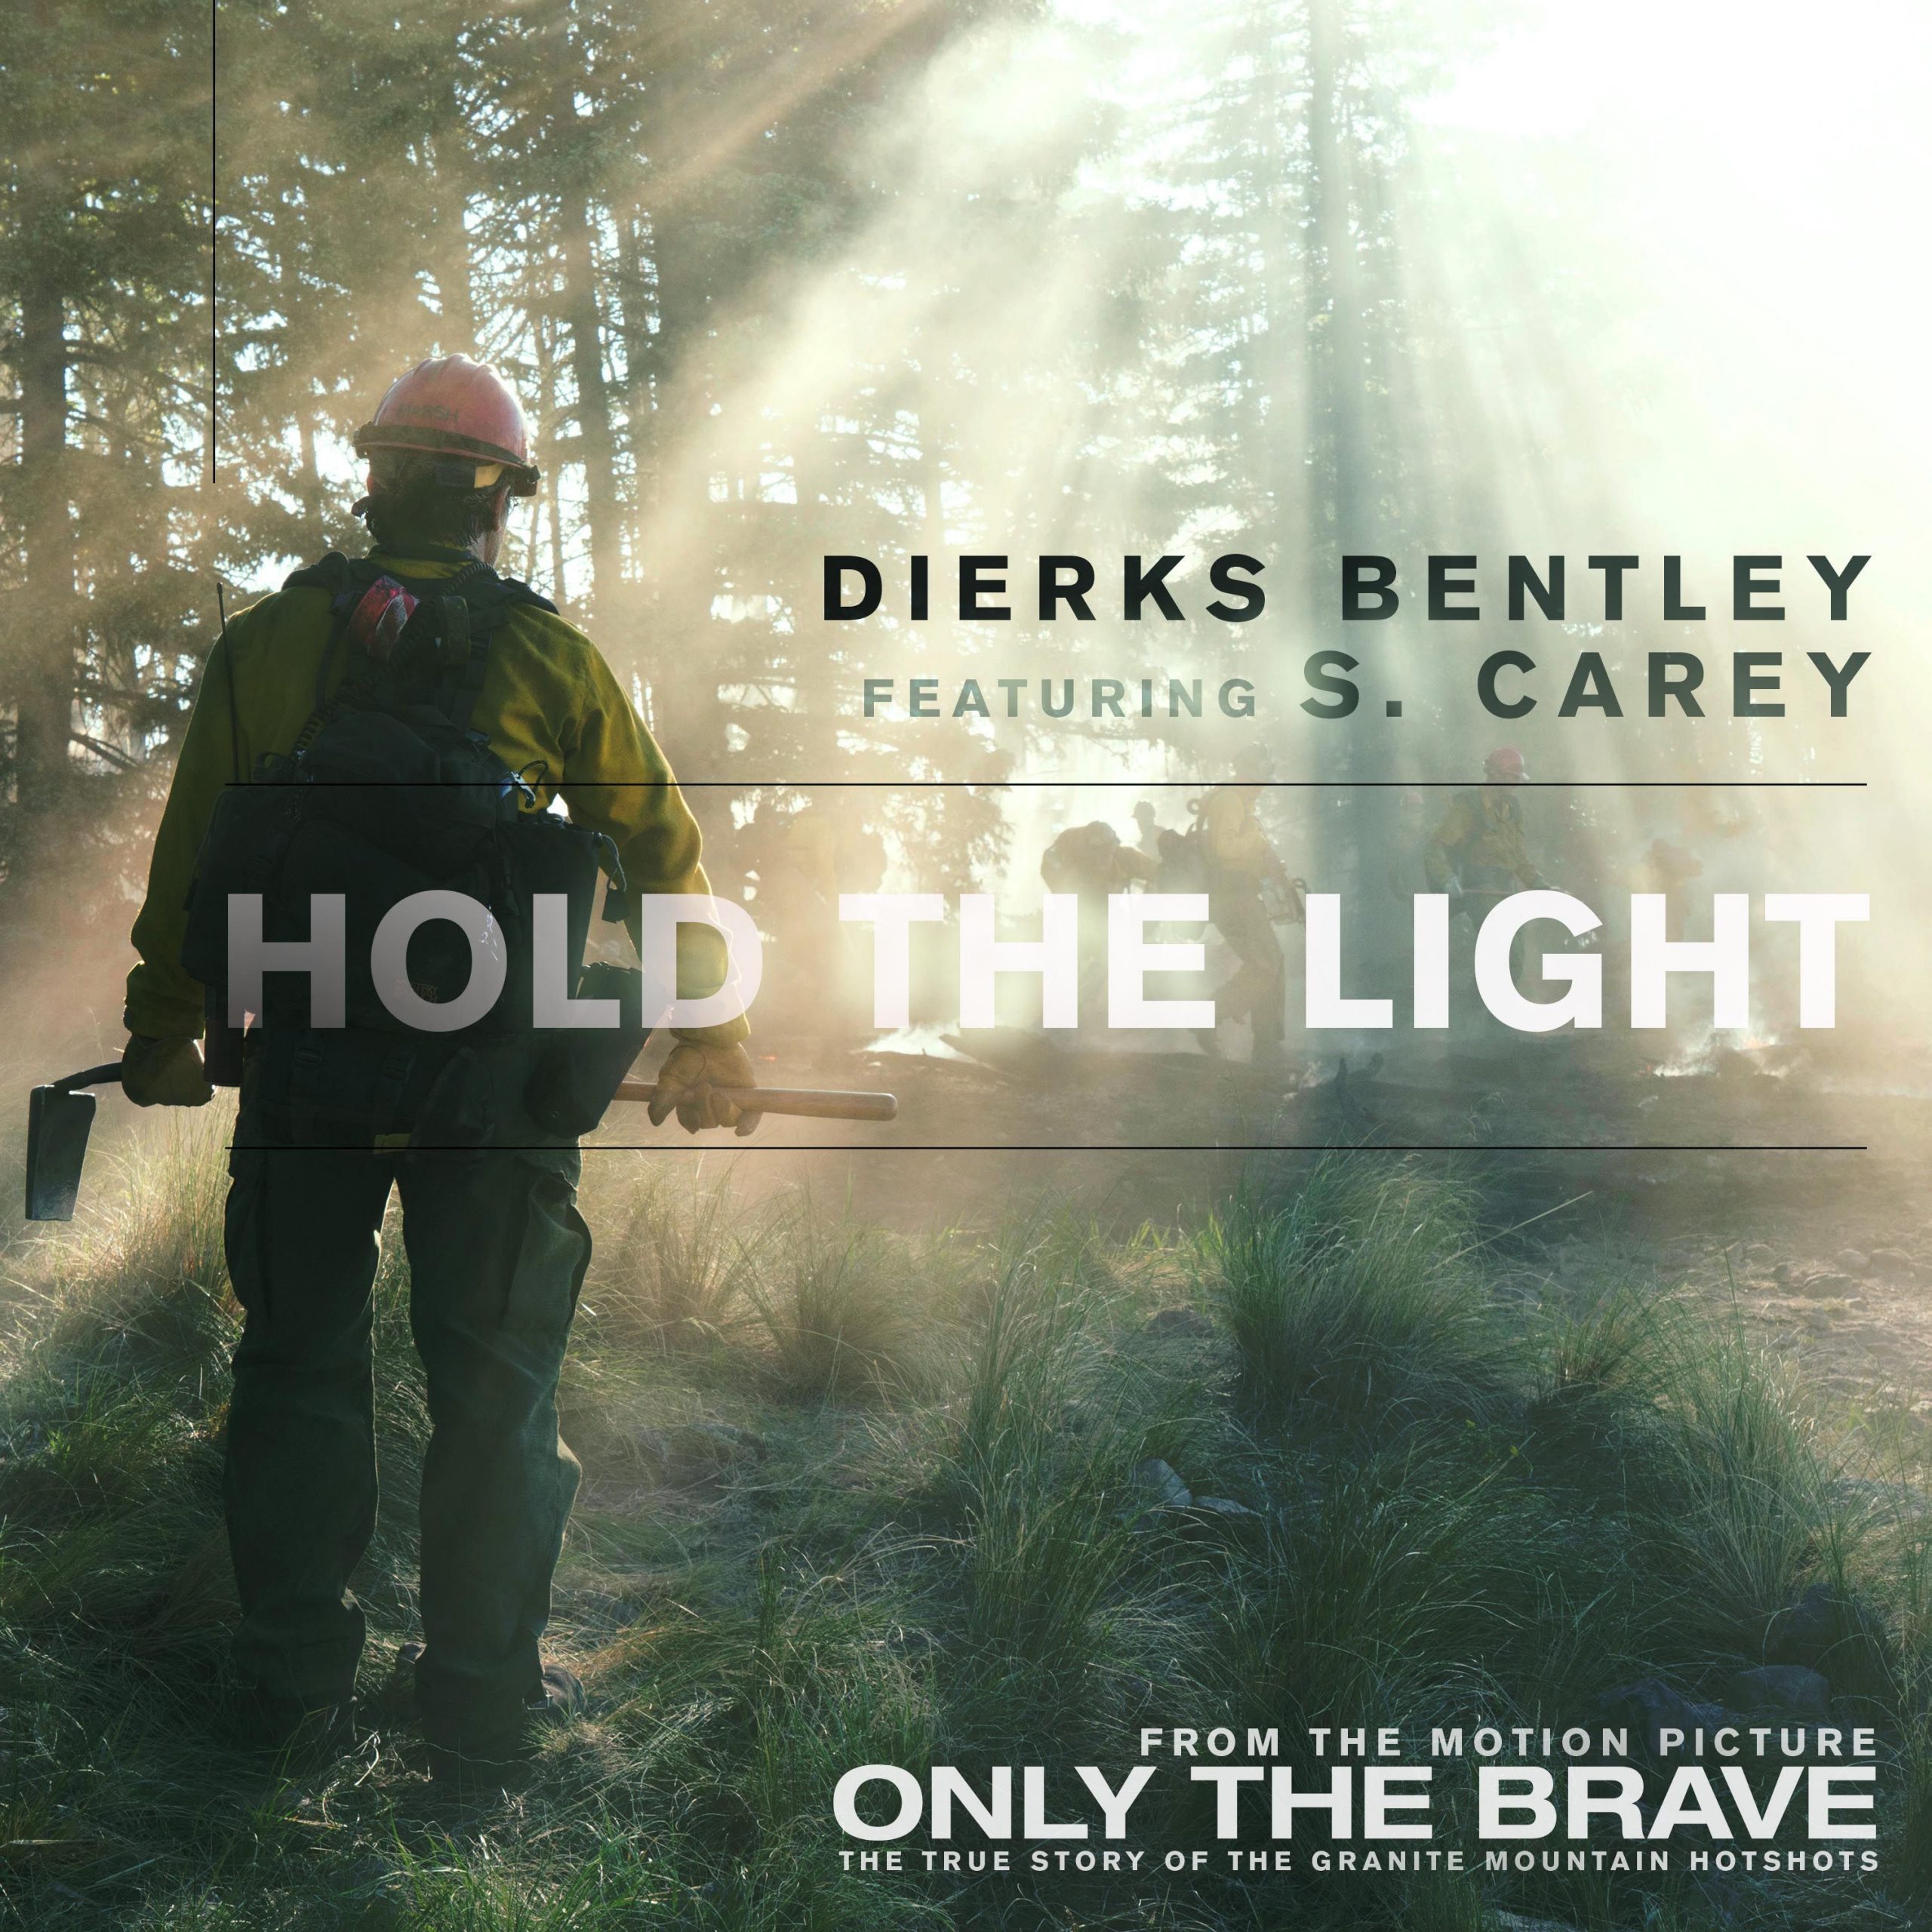 DIERKS BENTLEY AND BON IVER’S S. CAREY TEAM UP FOR “HOLD THE LIGHT” FROM UPCOMING FILM ONLY THE BRAVE SONG AVAILABLE NOW